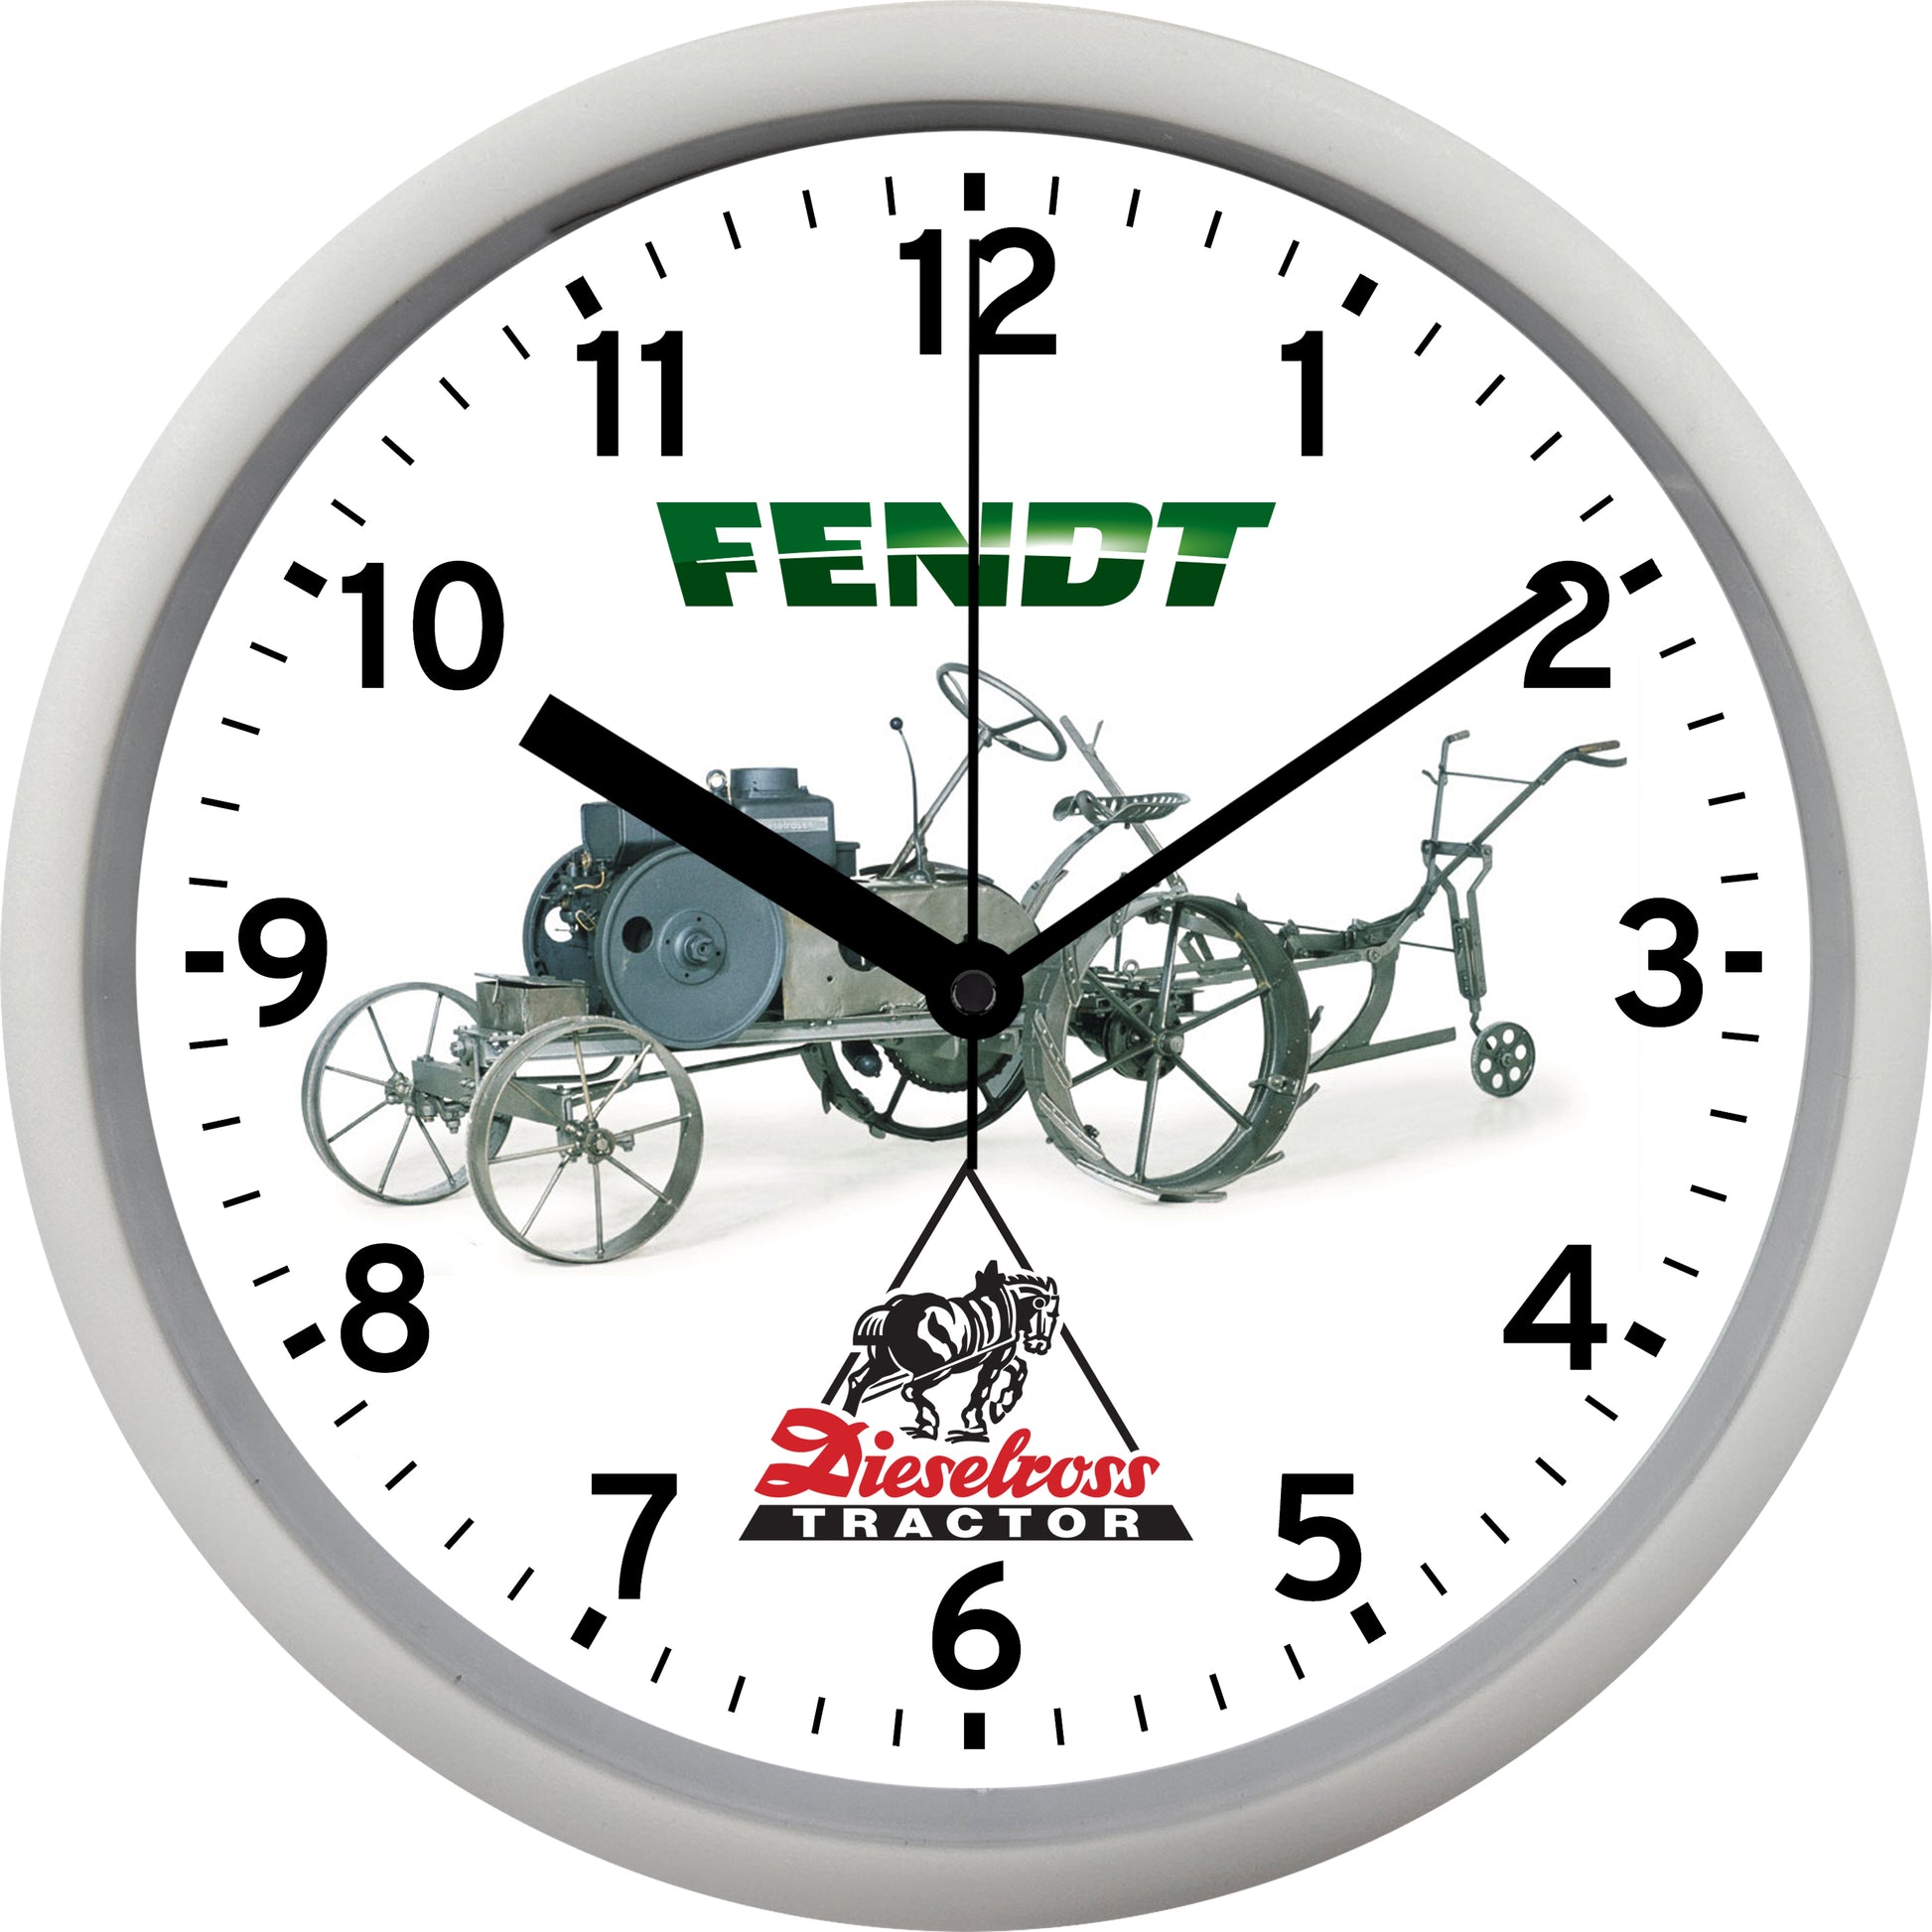 Dieselross 6 HP Tractor with Plow Wall Clock